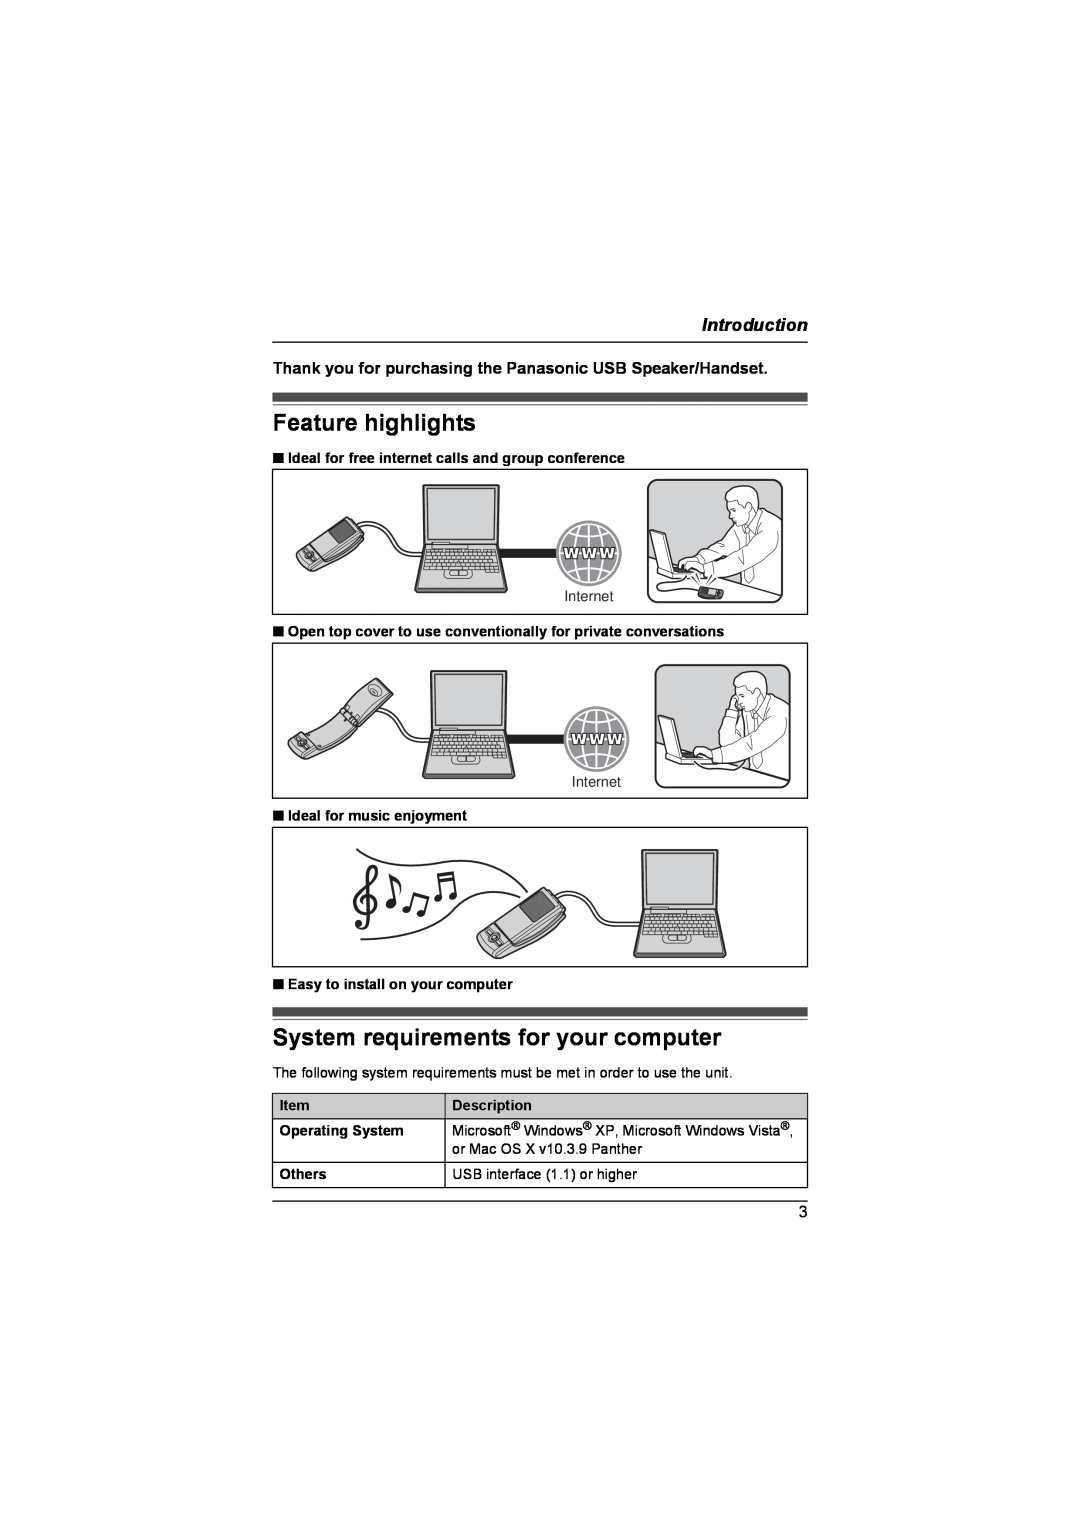 Panasonic KX-TS710 operating instructions Feature highlights, System requirements for your computer, Introduction 